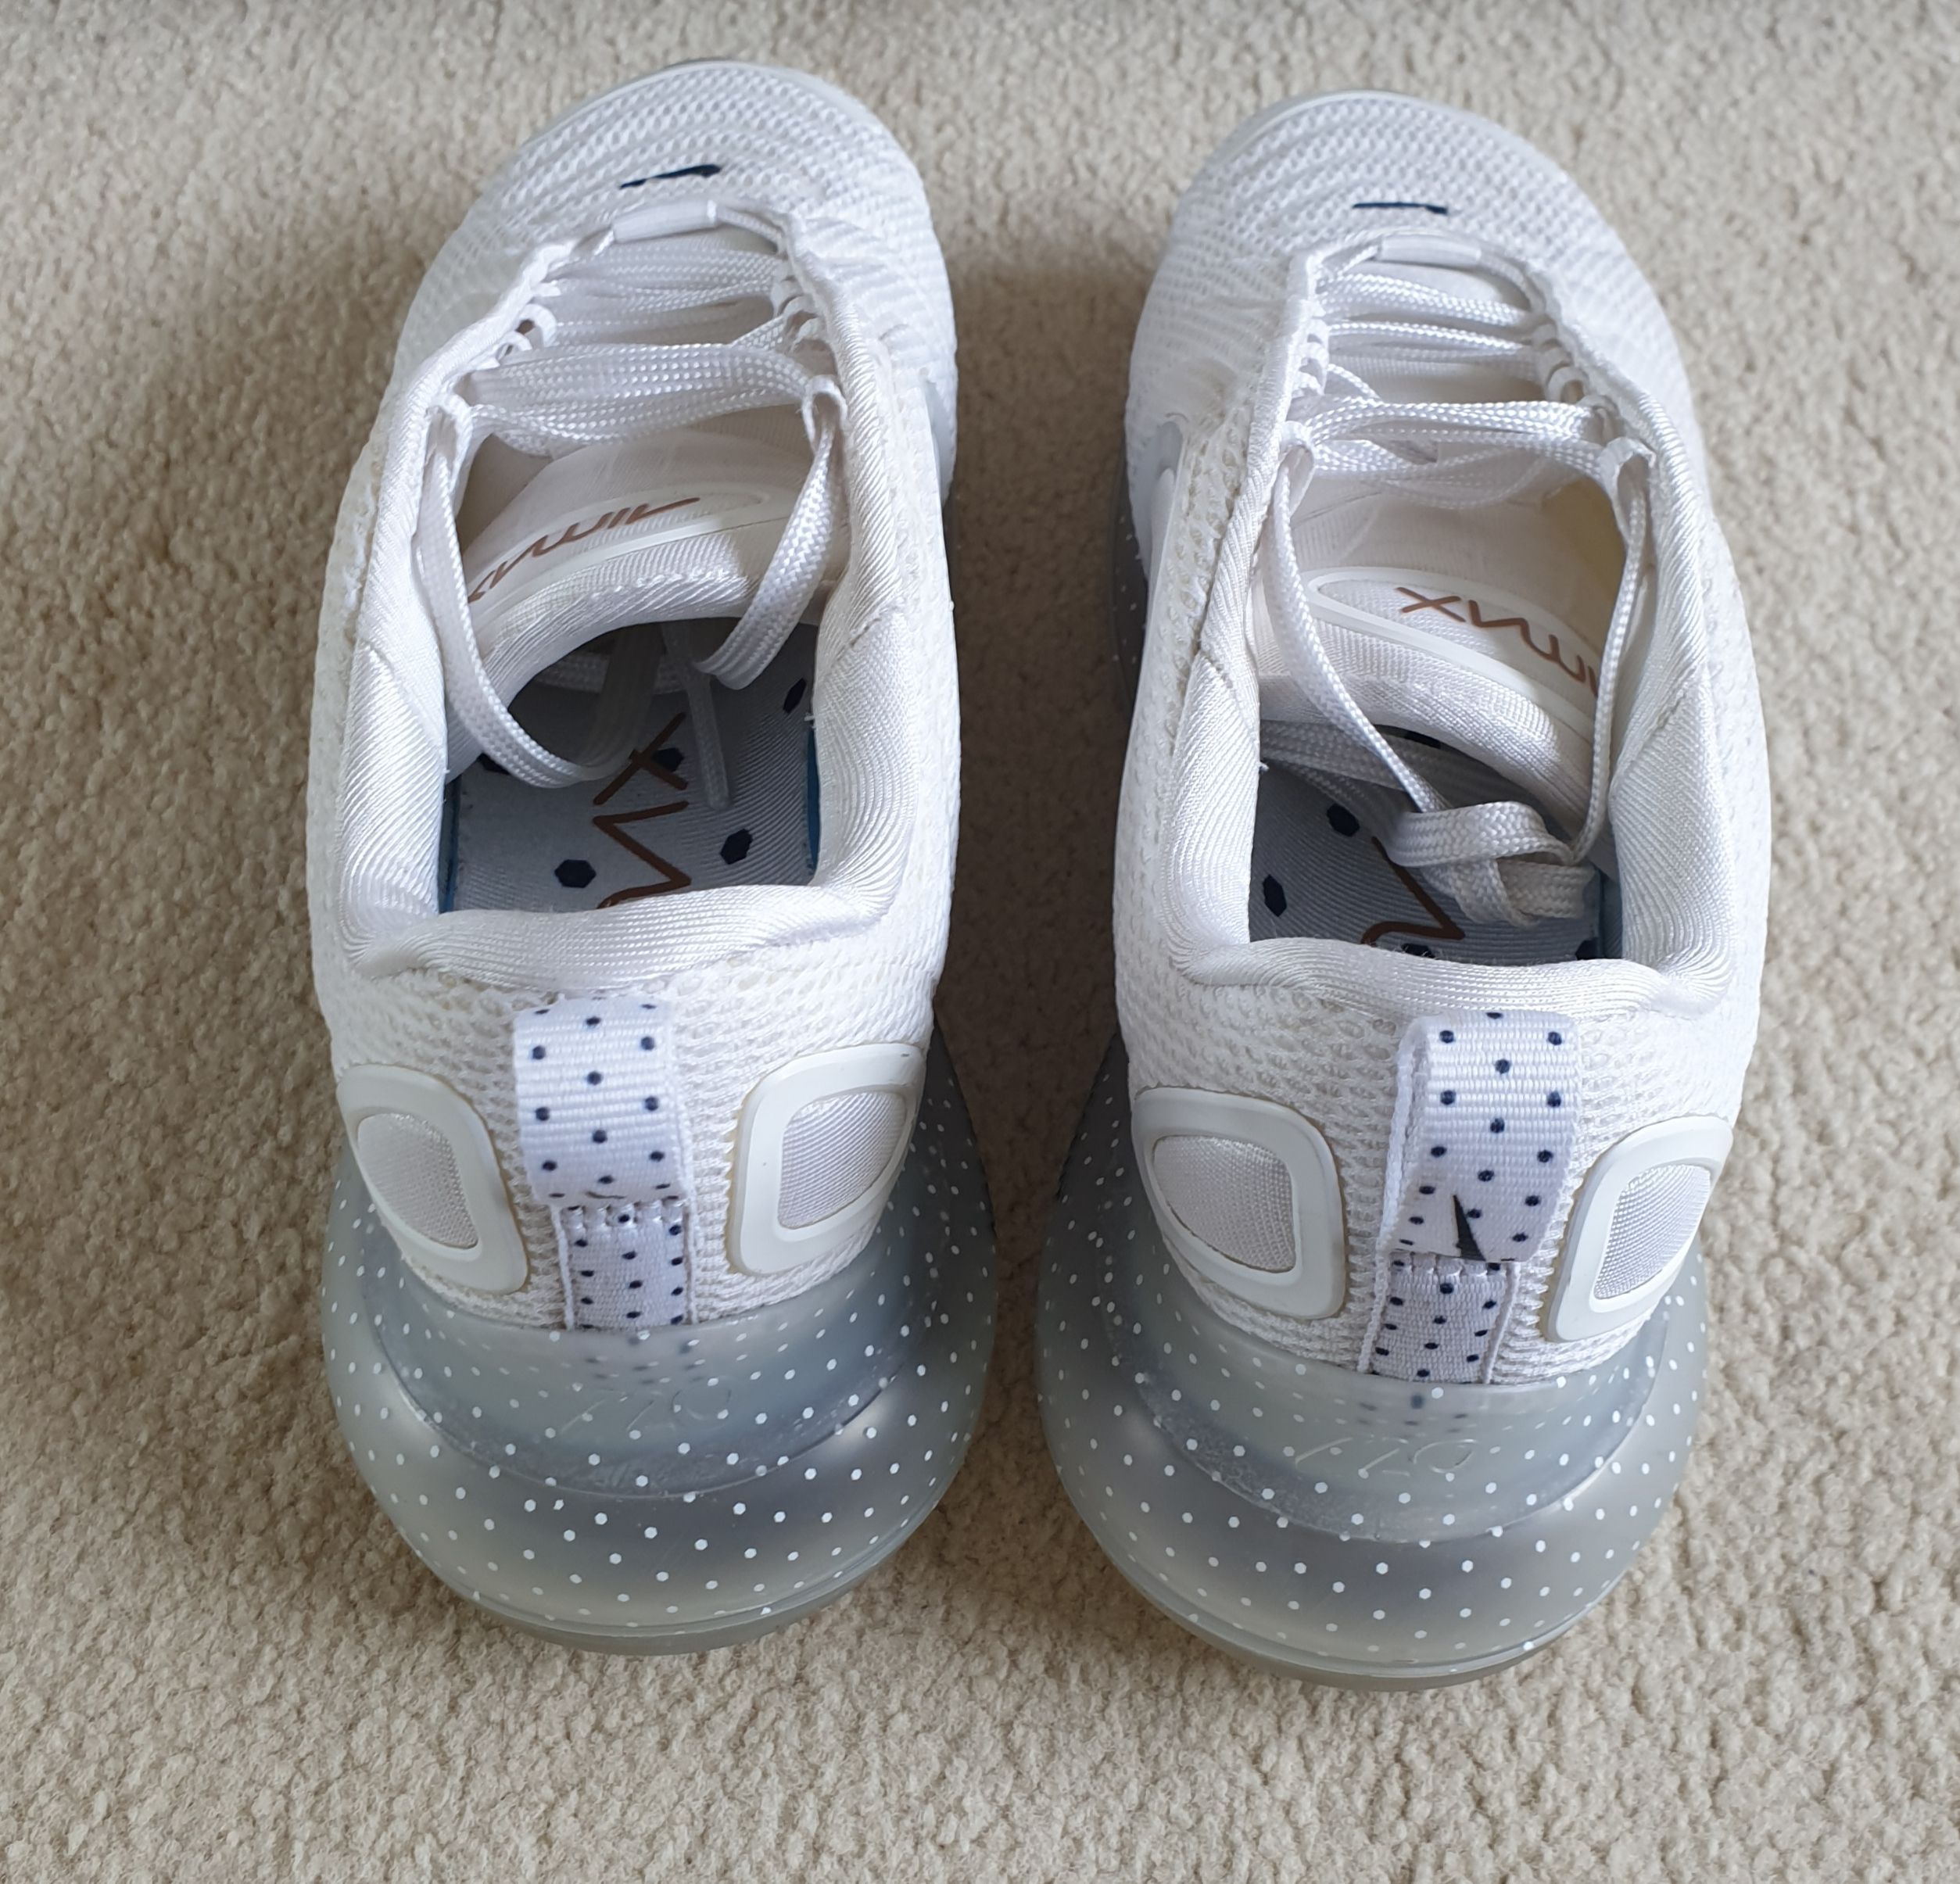 nike air max 720 nos differences